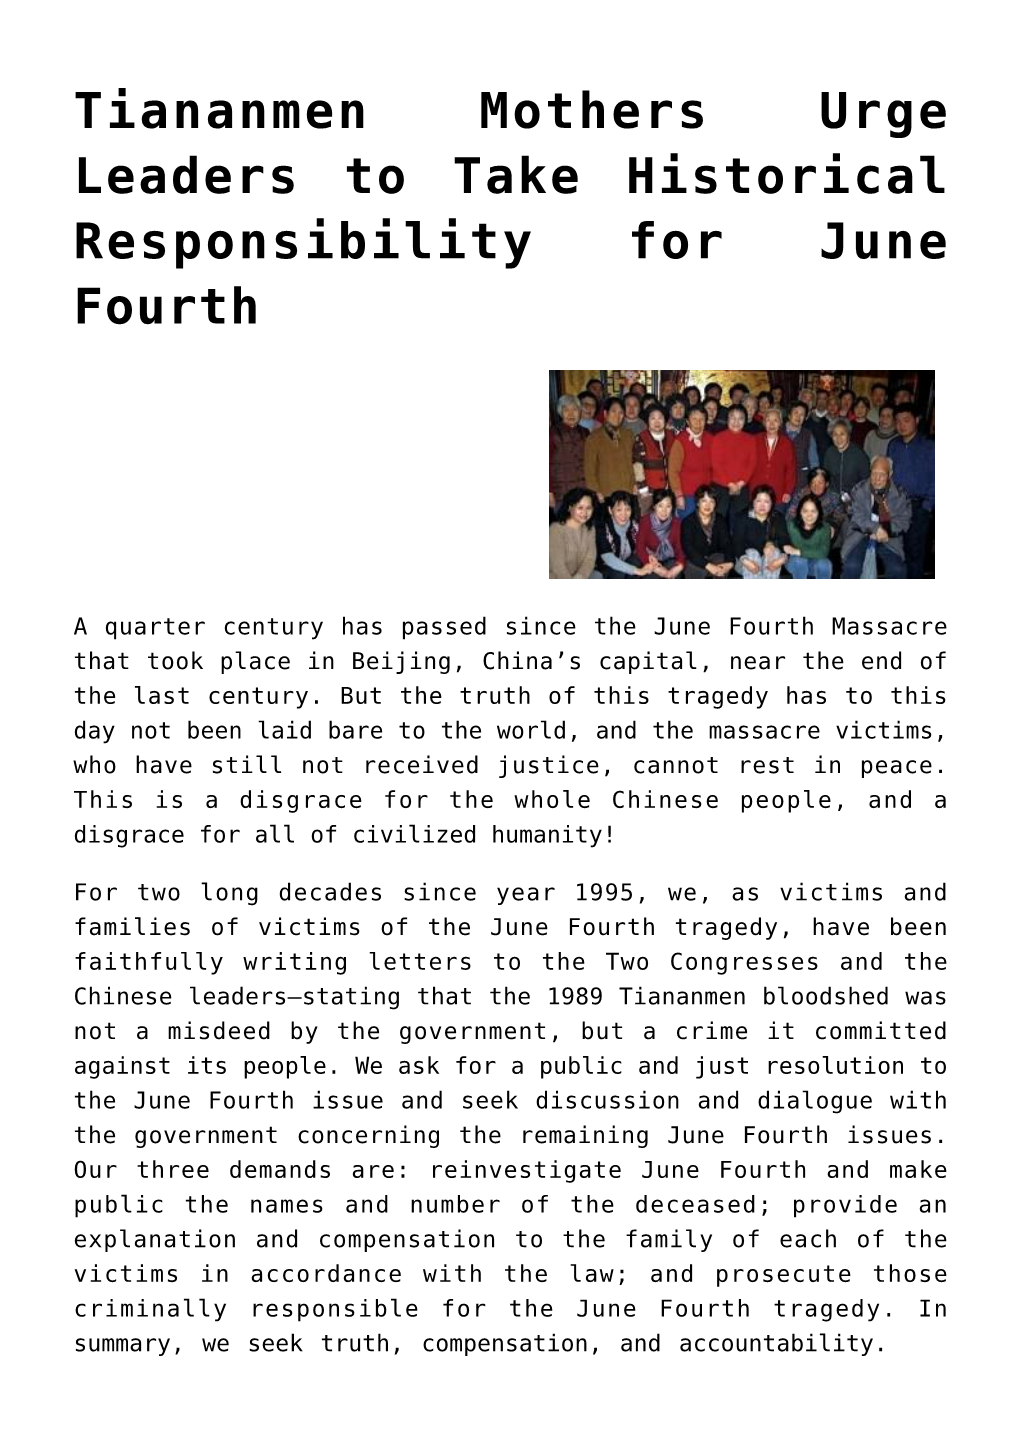 Tiananmen Mothers Urge Leaders to Take Historical Responsibility for June Fourth